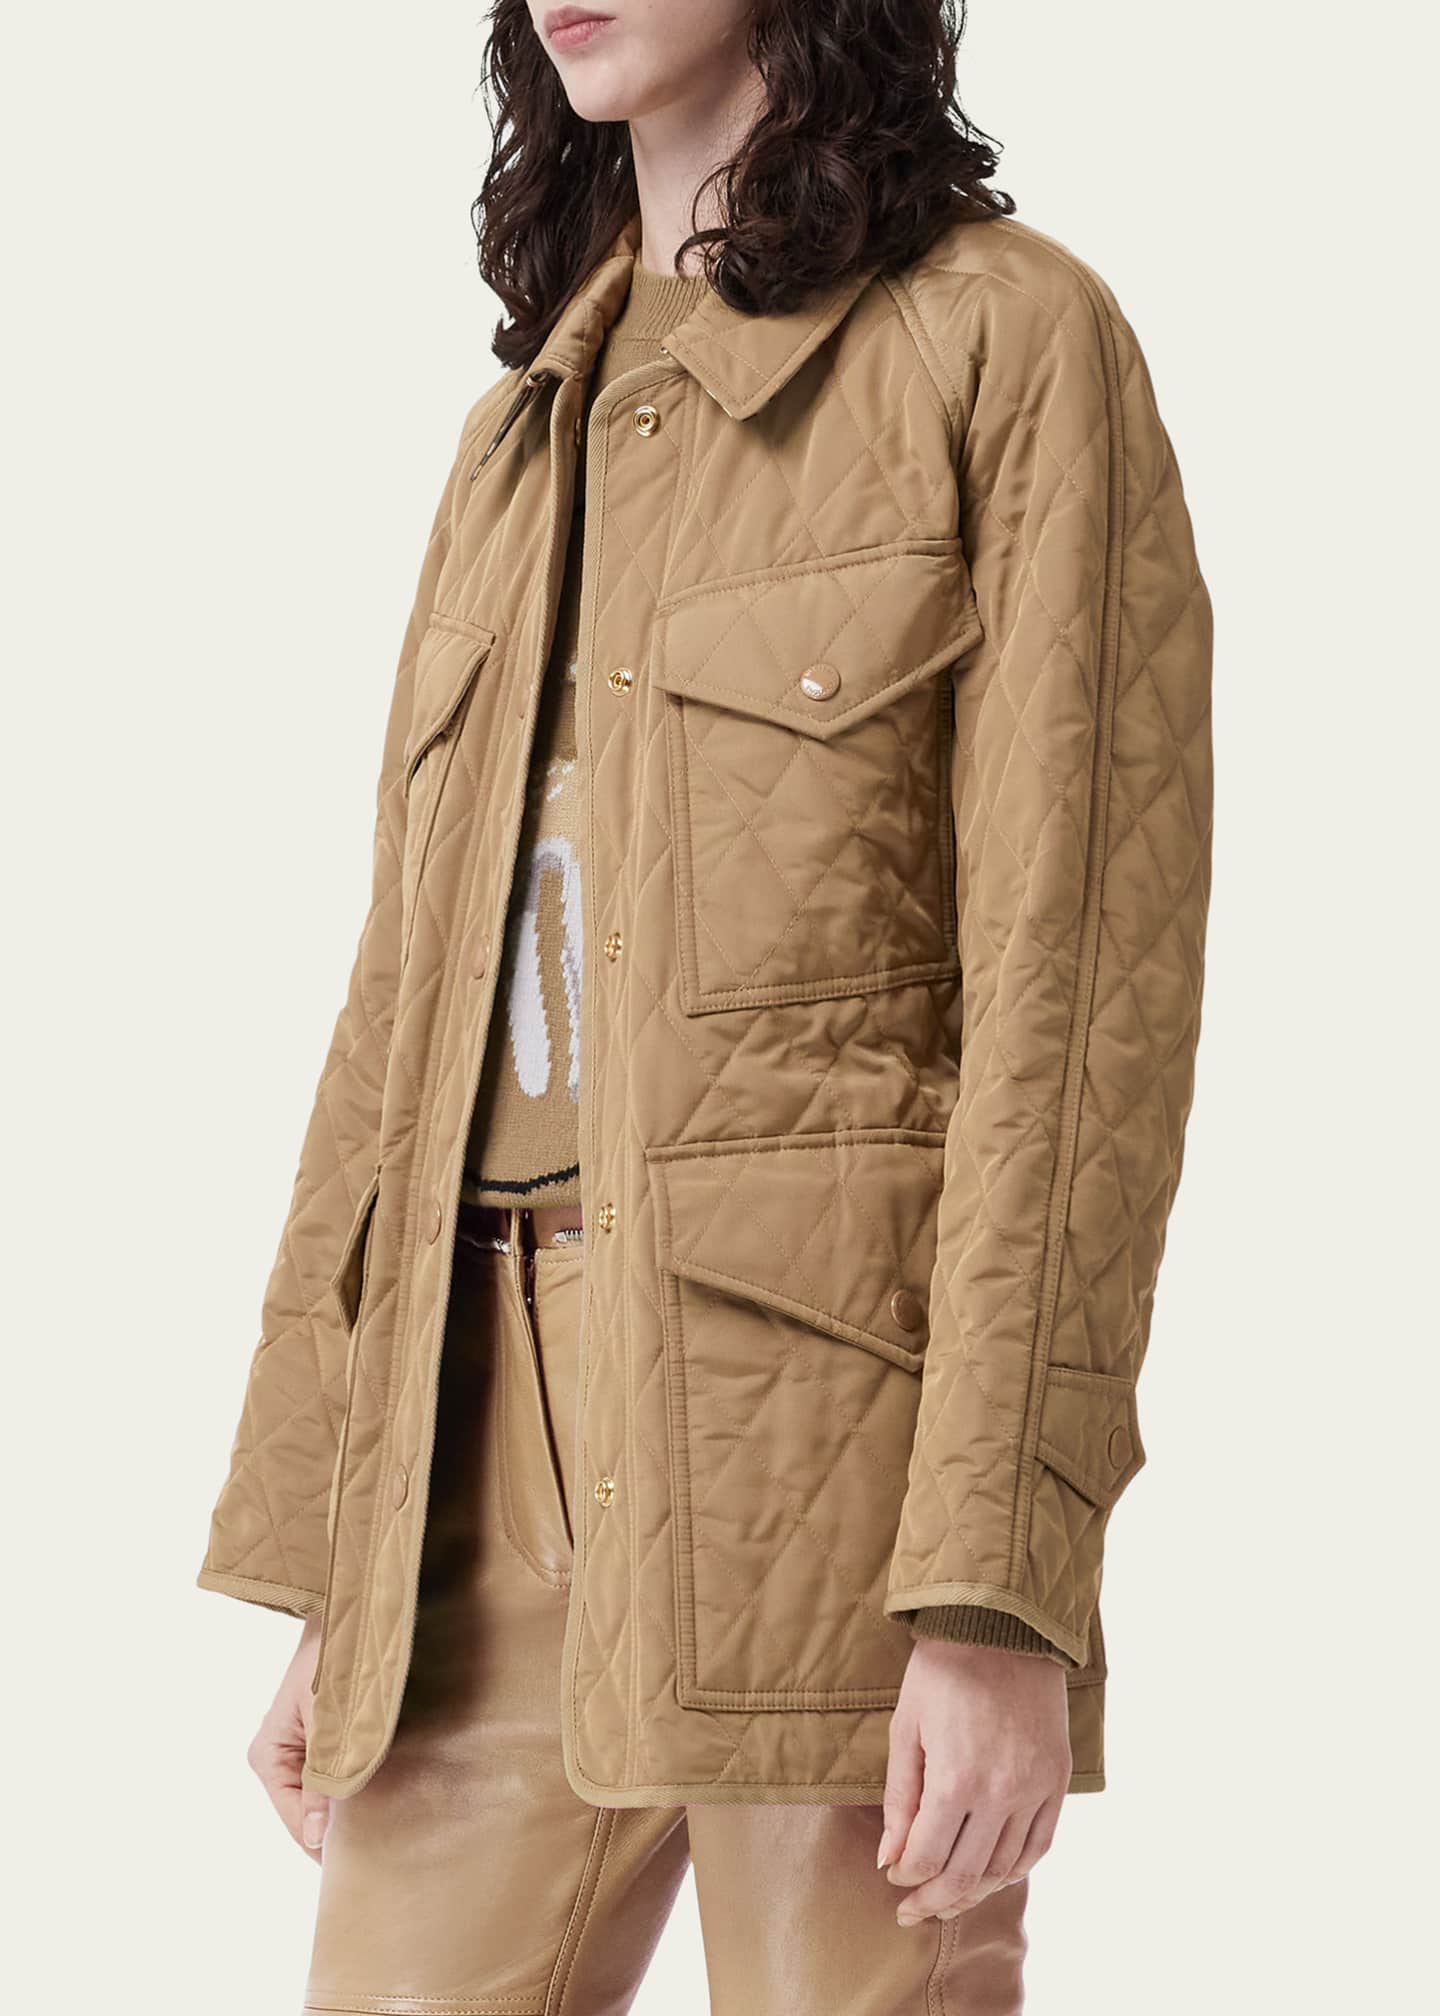 Burberry Kemble Quilted Jacket with Belt - Bergdorf Goodman